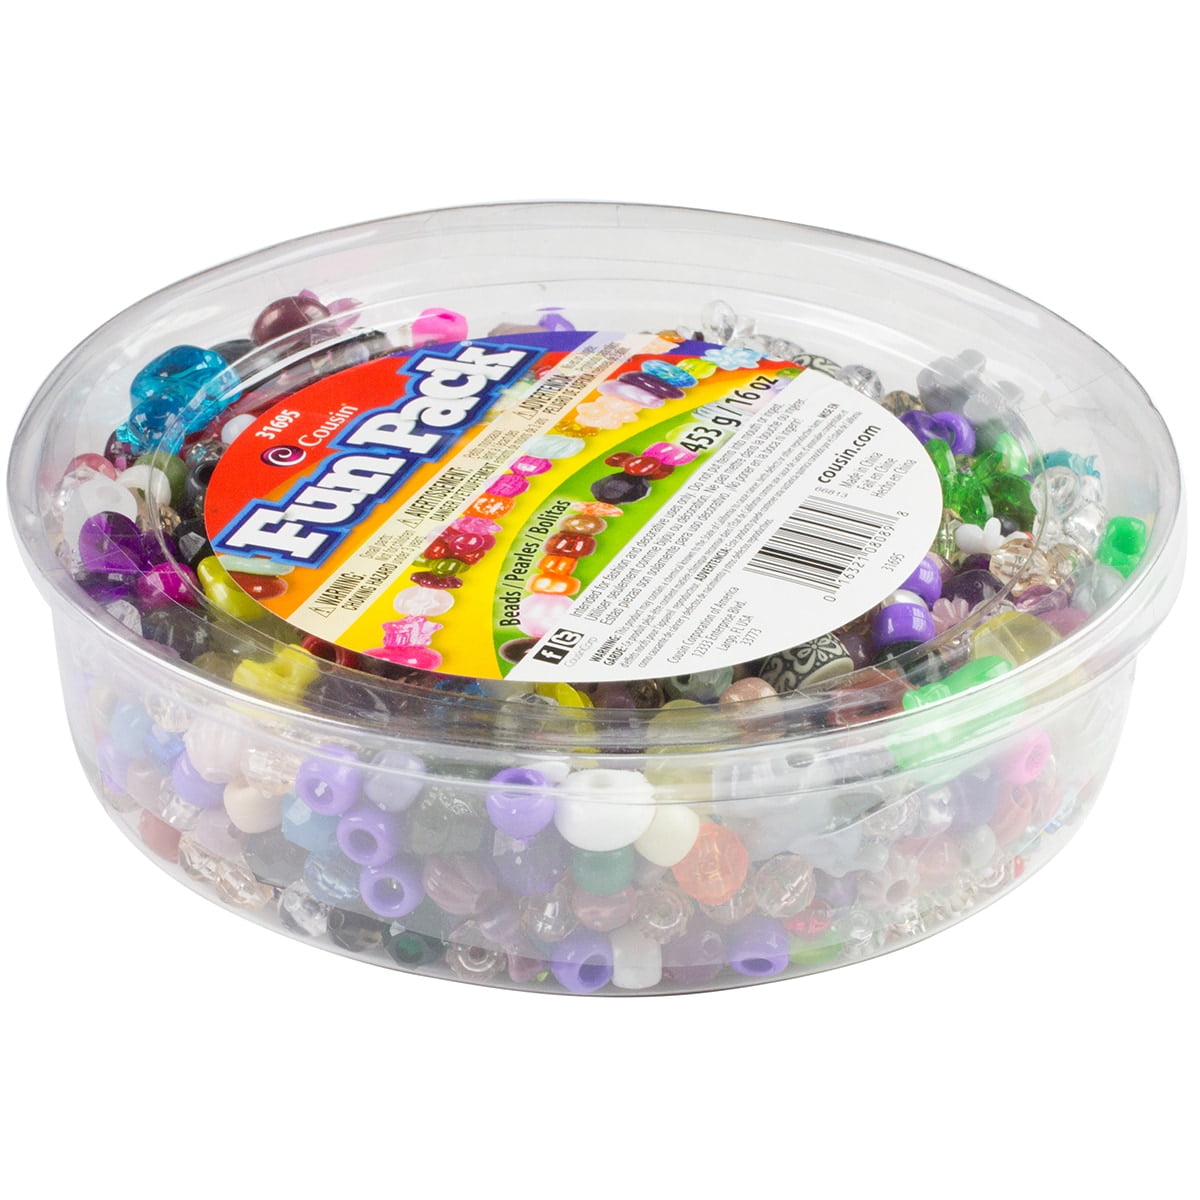 Cousin Fun Pack Acrylic Dice Beads 8Mm To 10Mm 62/Pkg-Assorted Colors